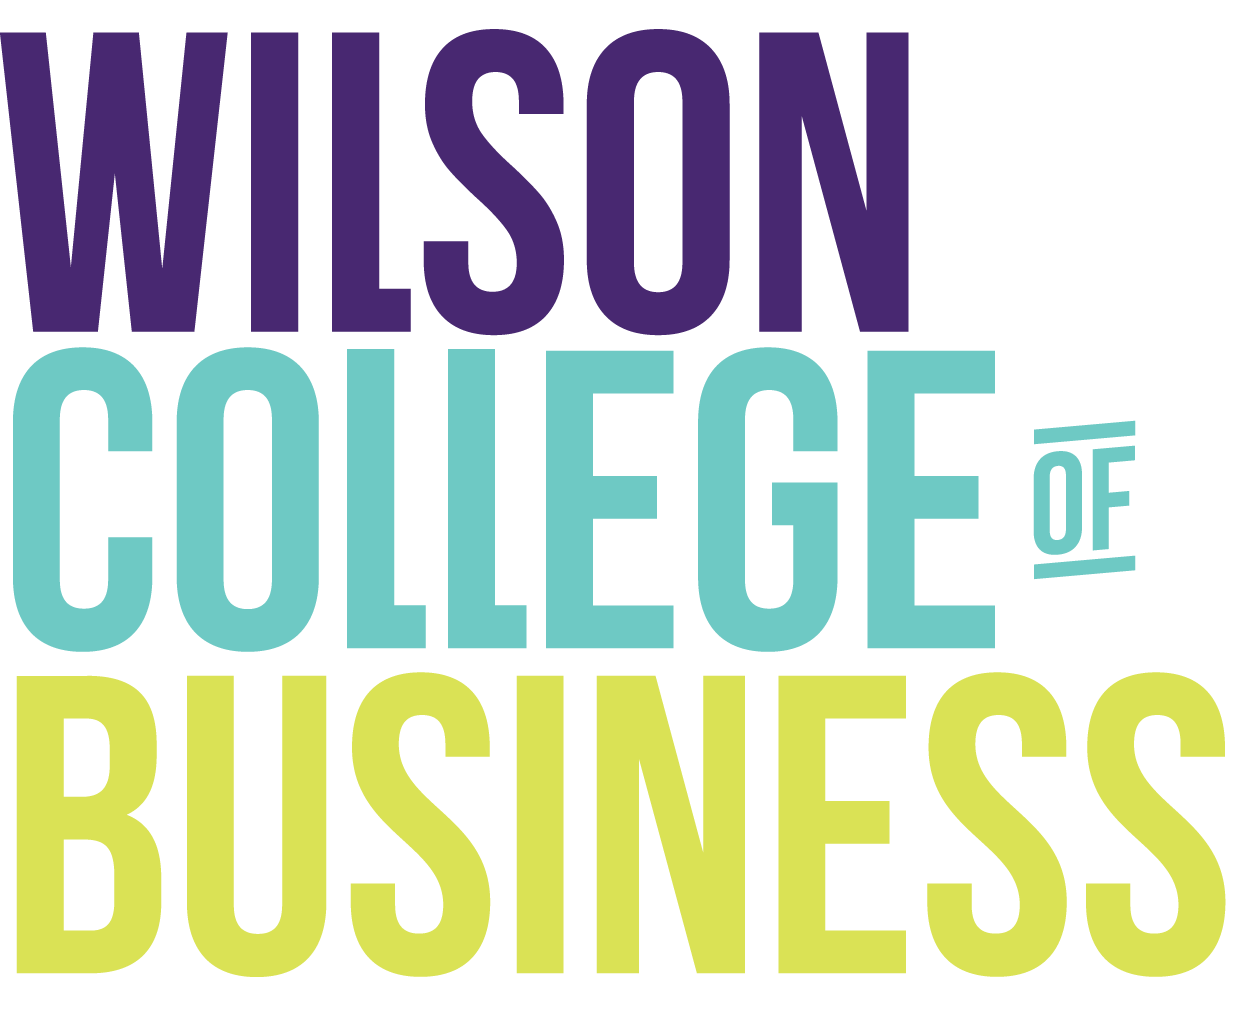 Wilson College of Business